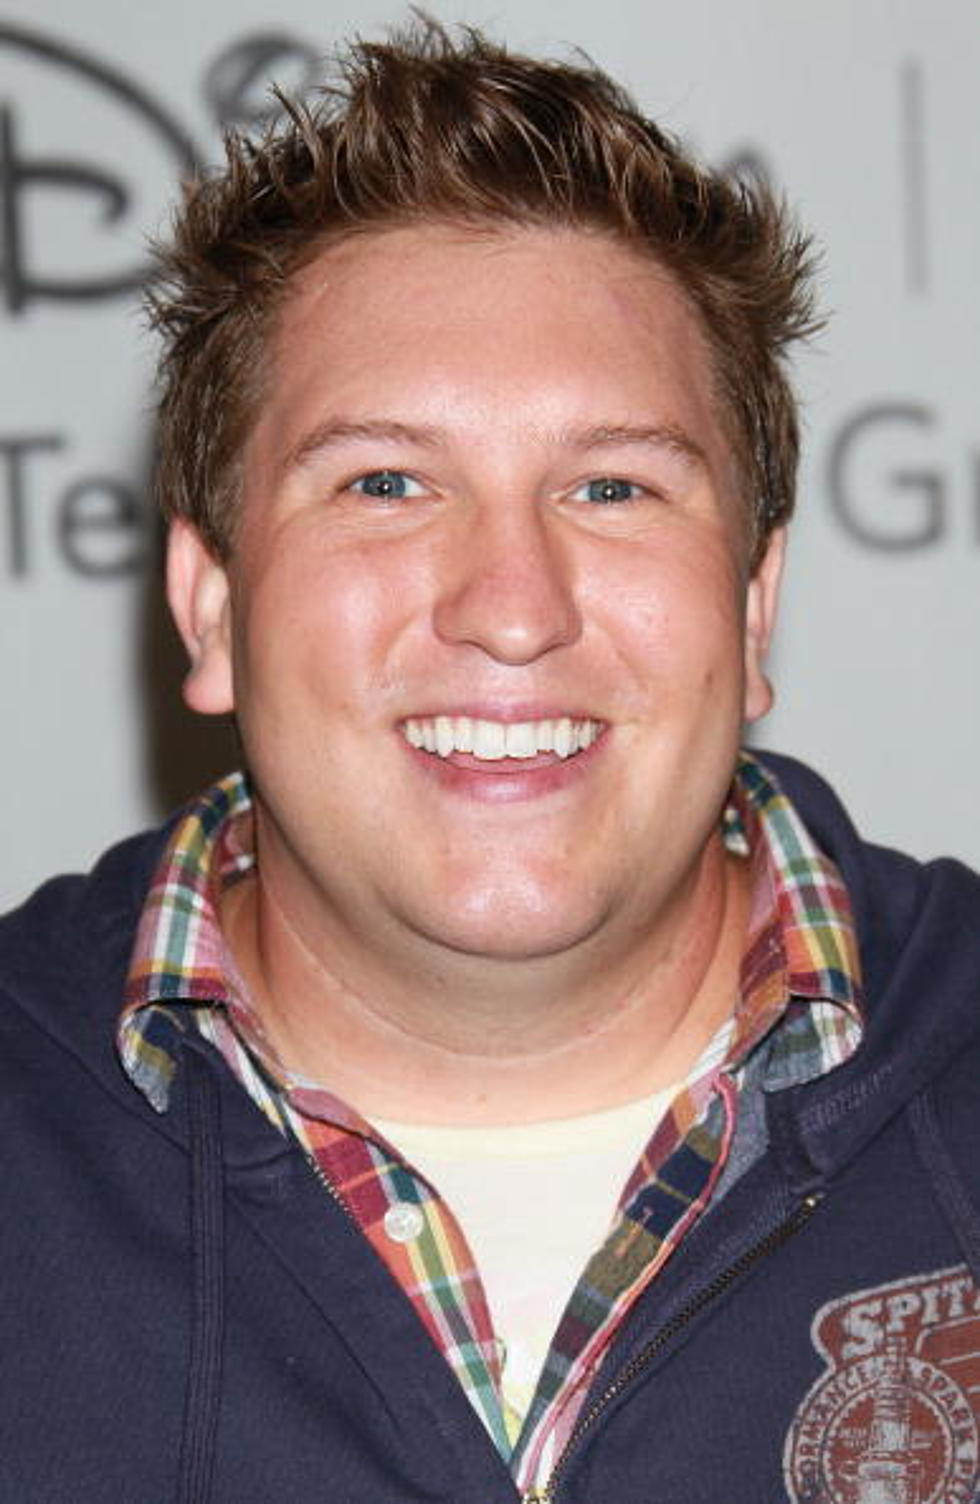 Nate Torrence From ABC’s “Mr. Sunshine” [INTERVIEW]